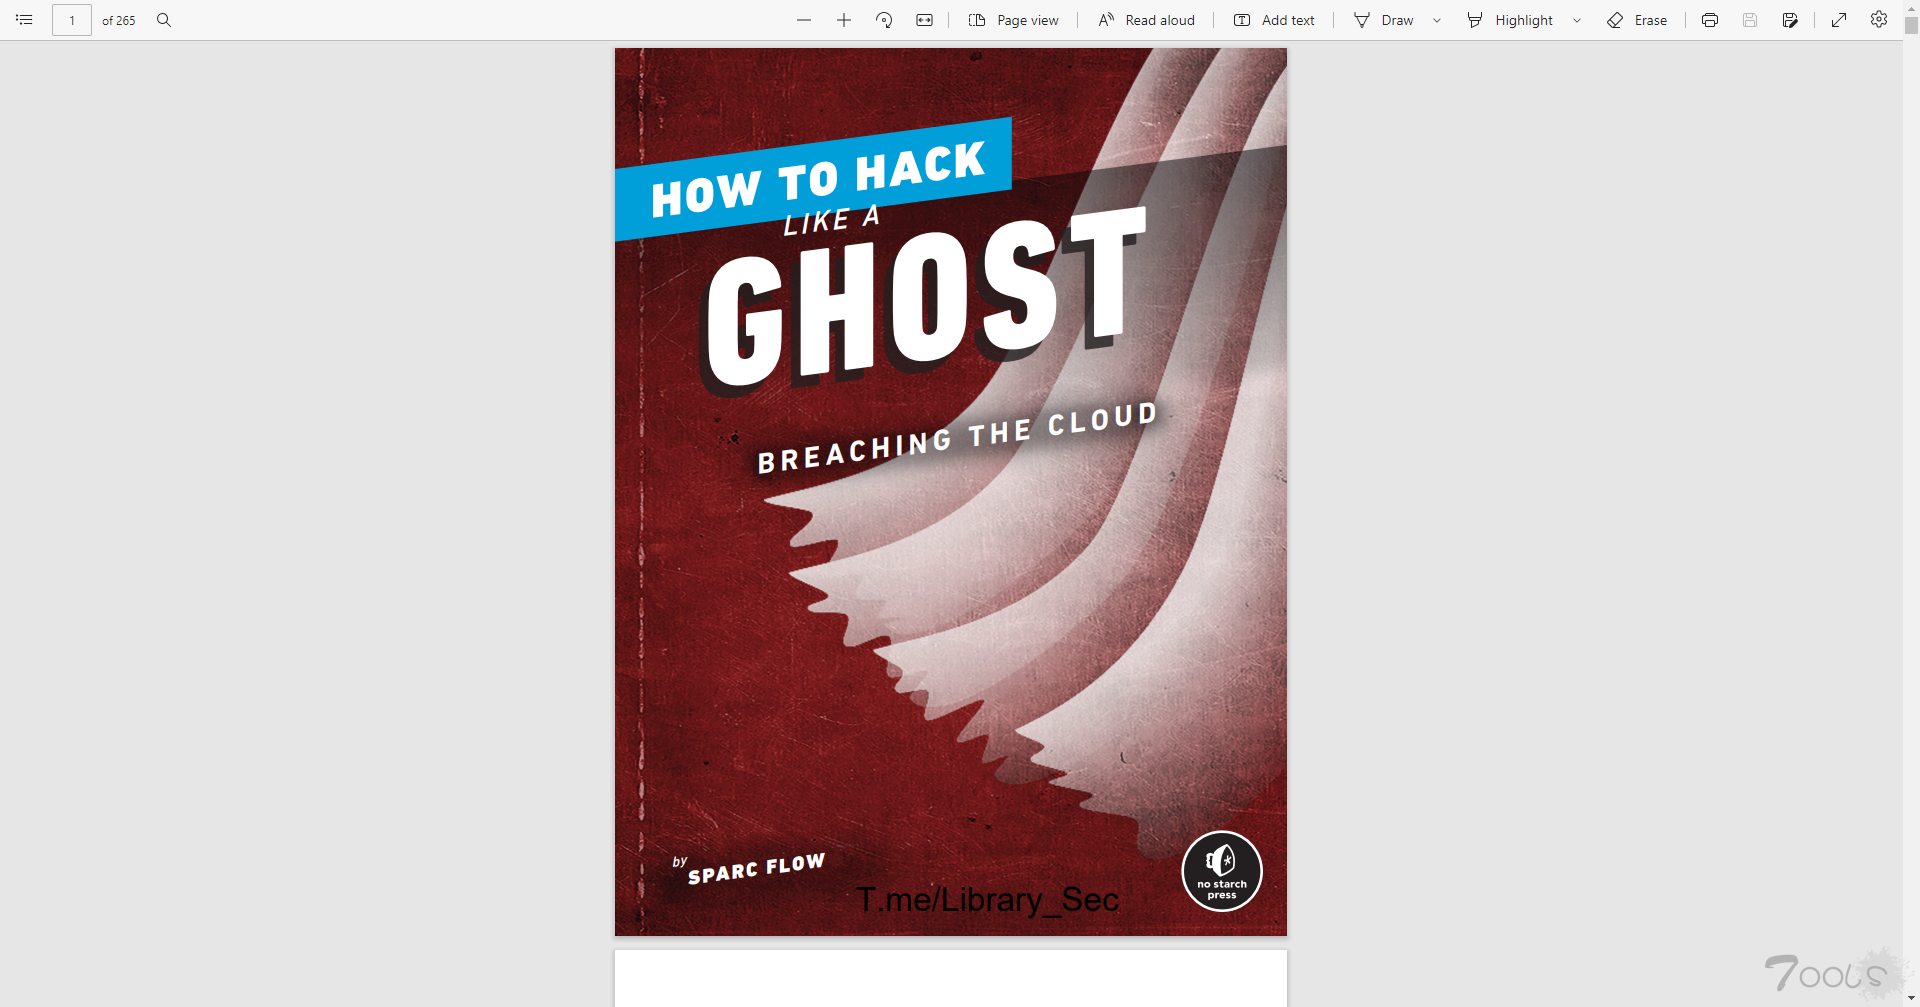 How to hack Like a ghost